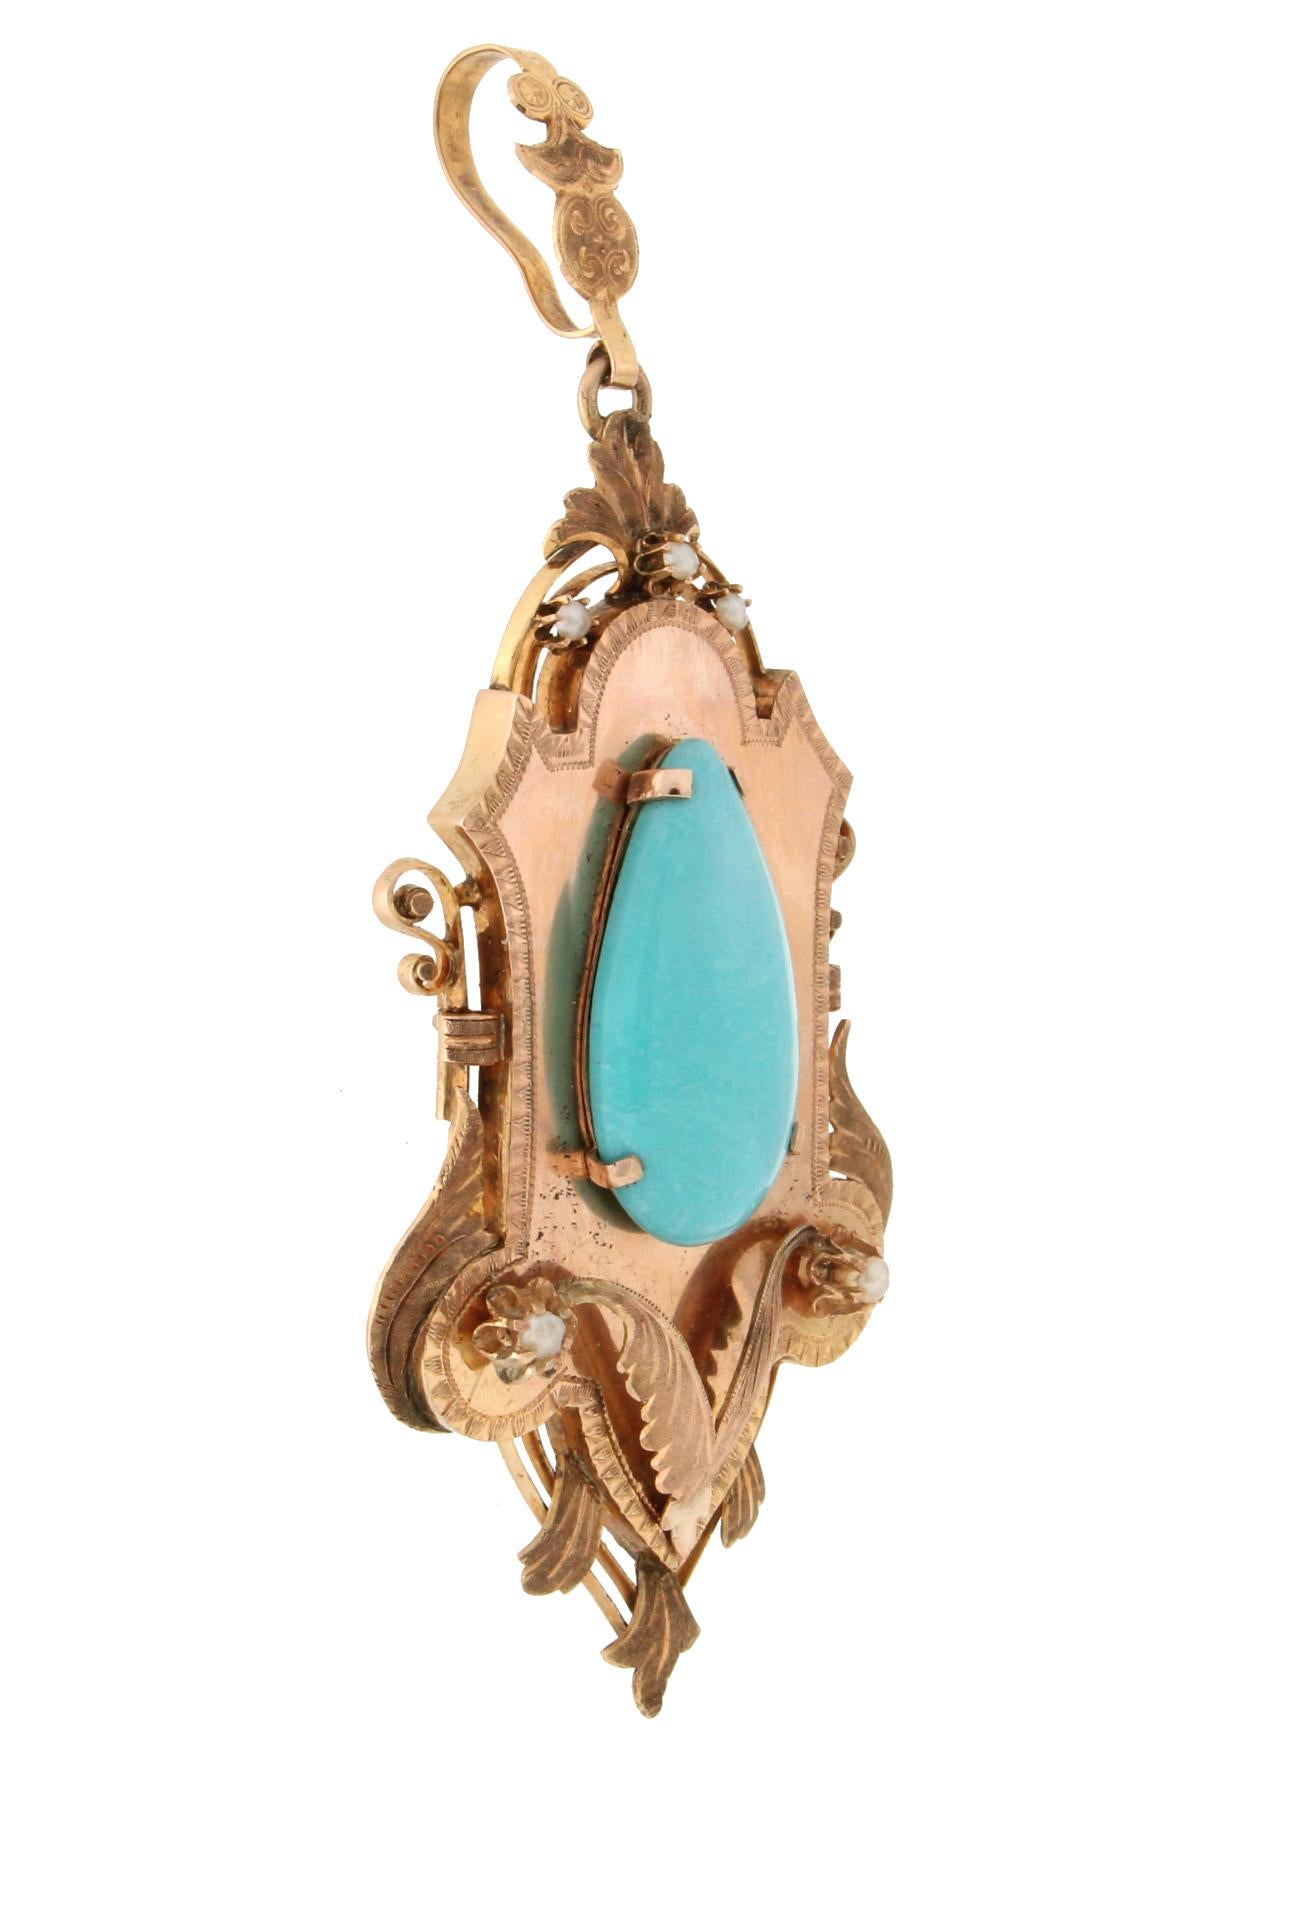 Round Cut Handcraft Turquoise 14 Karat Yellow Gold Pearls Pendant Necklace and Brooch